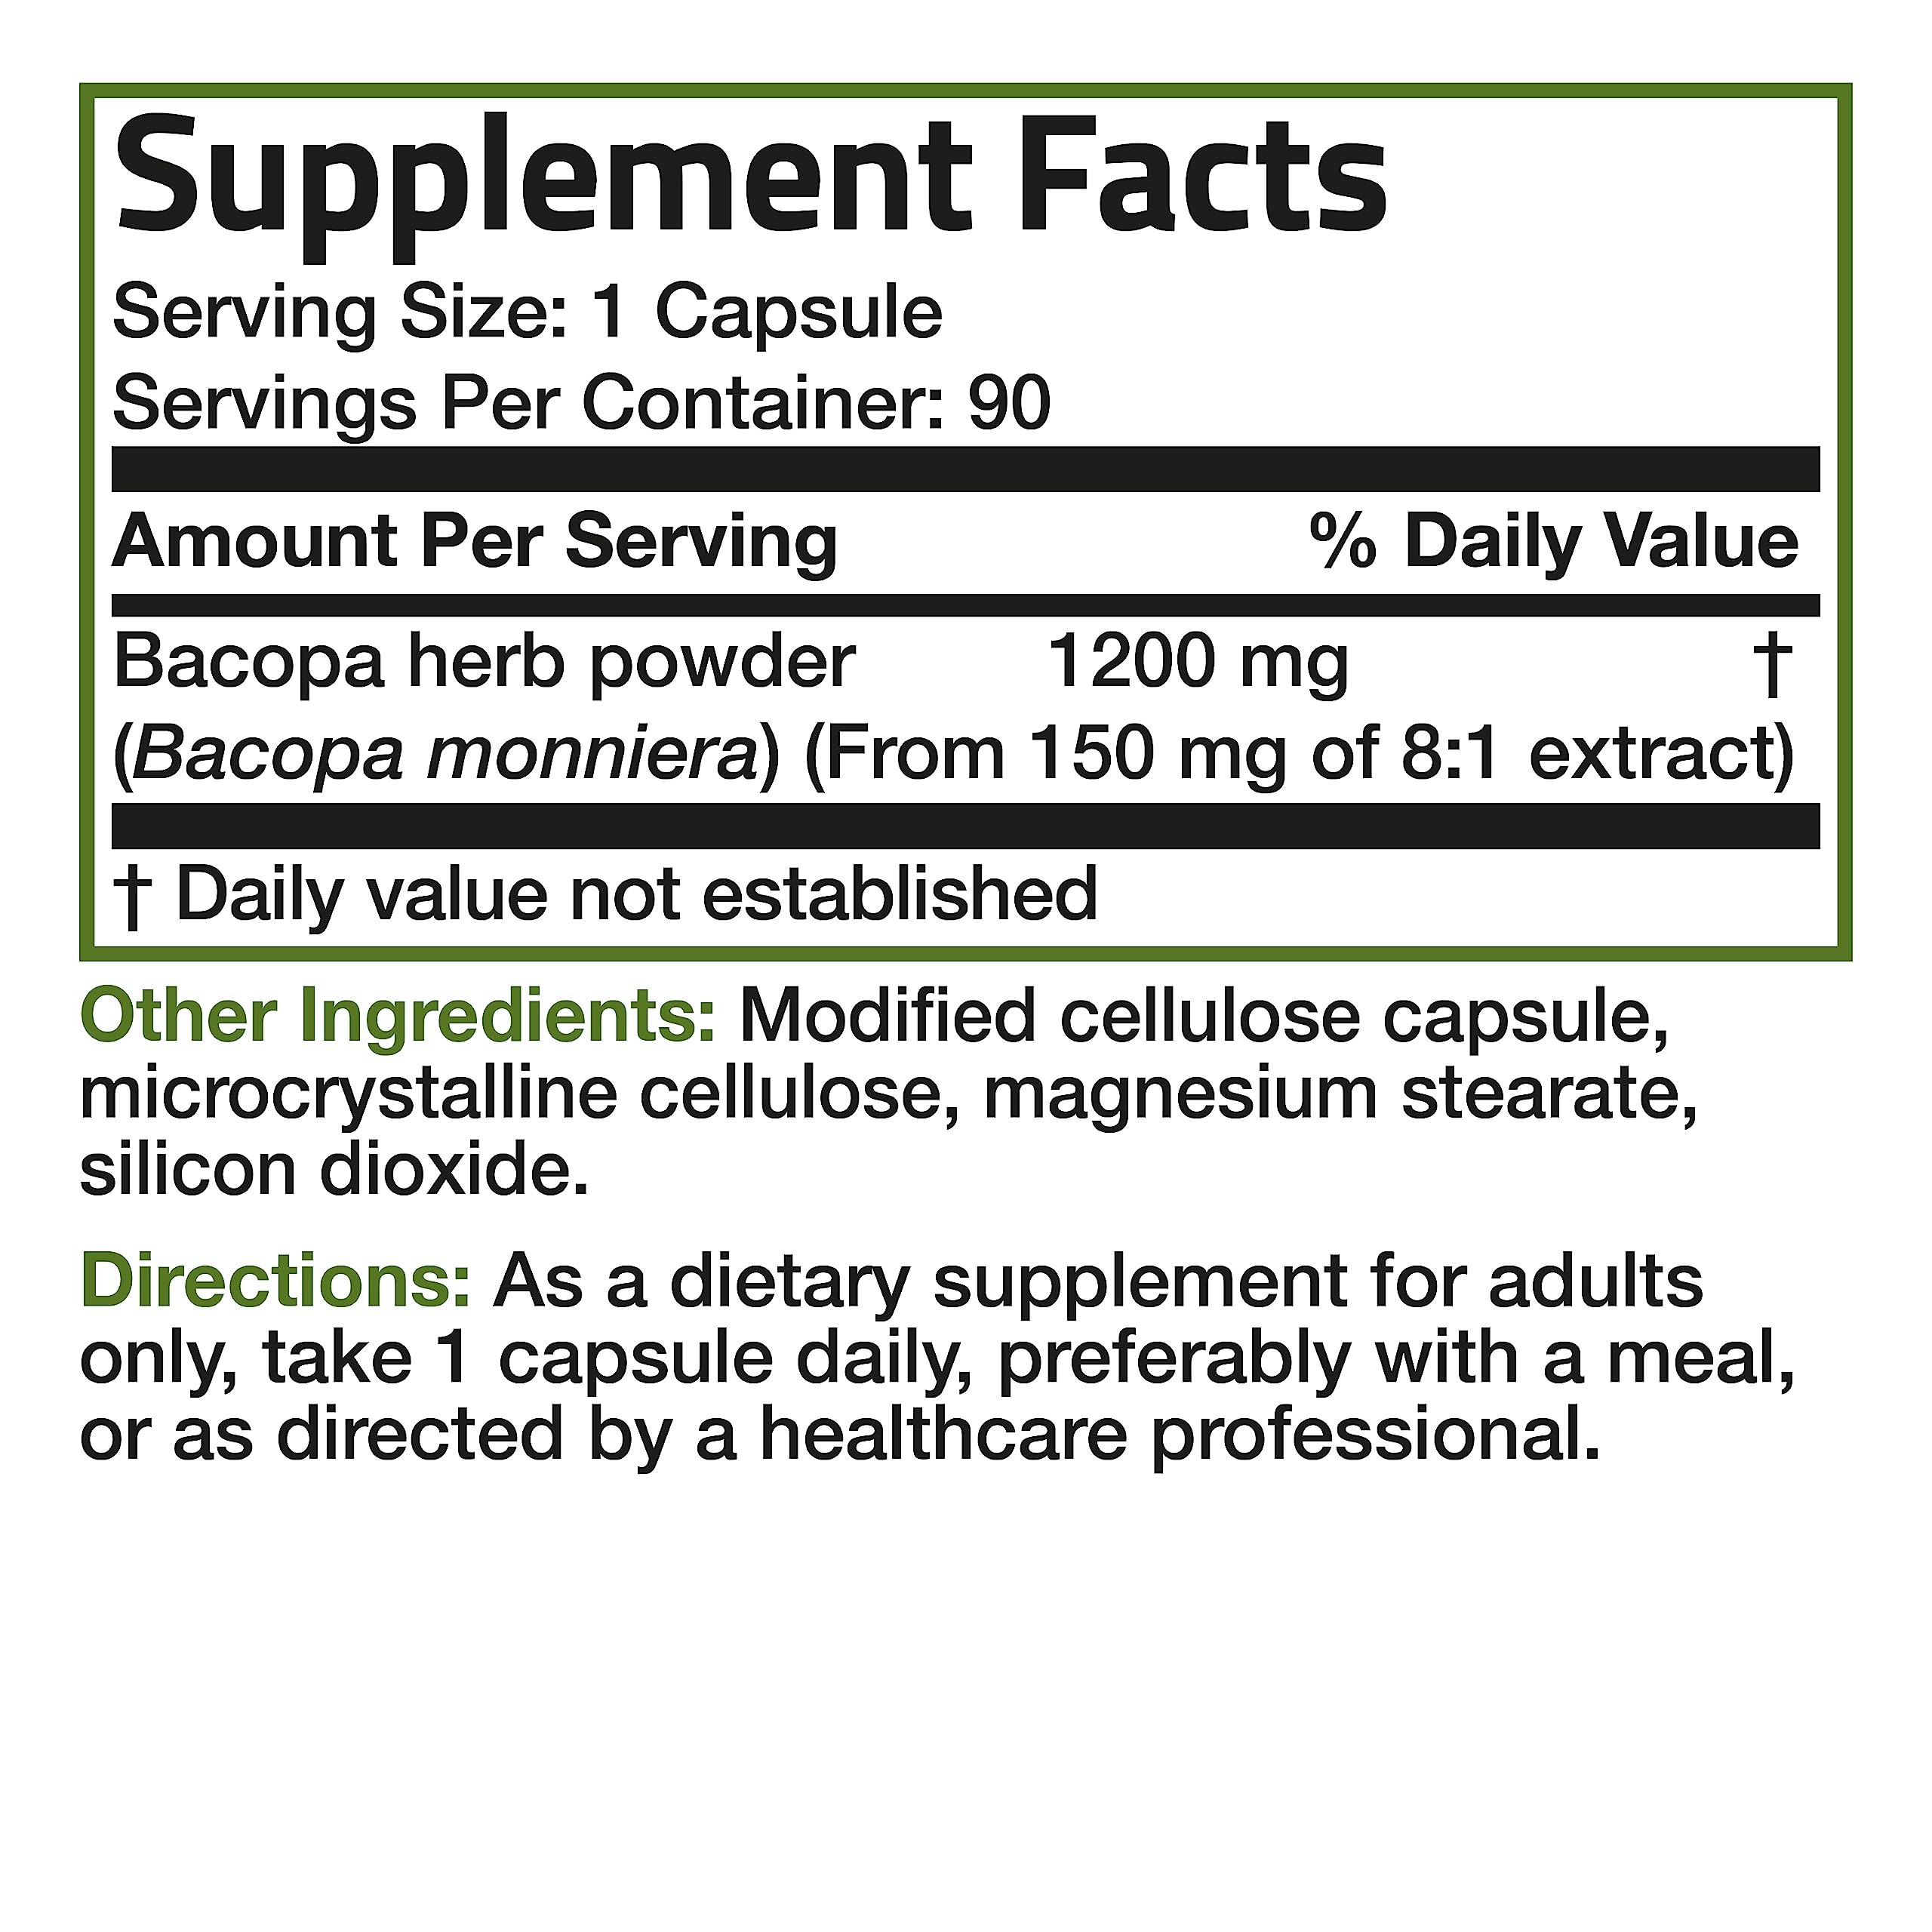 Bronson Bacopa 1200 MG Supports Healthy Brain Function and Mental Performance, Traditional Herb, Non-GMO, 90 Vegetarian Capsules